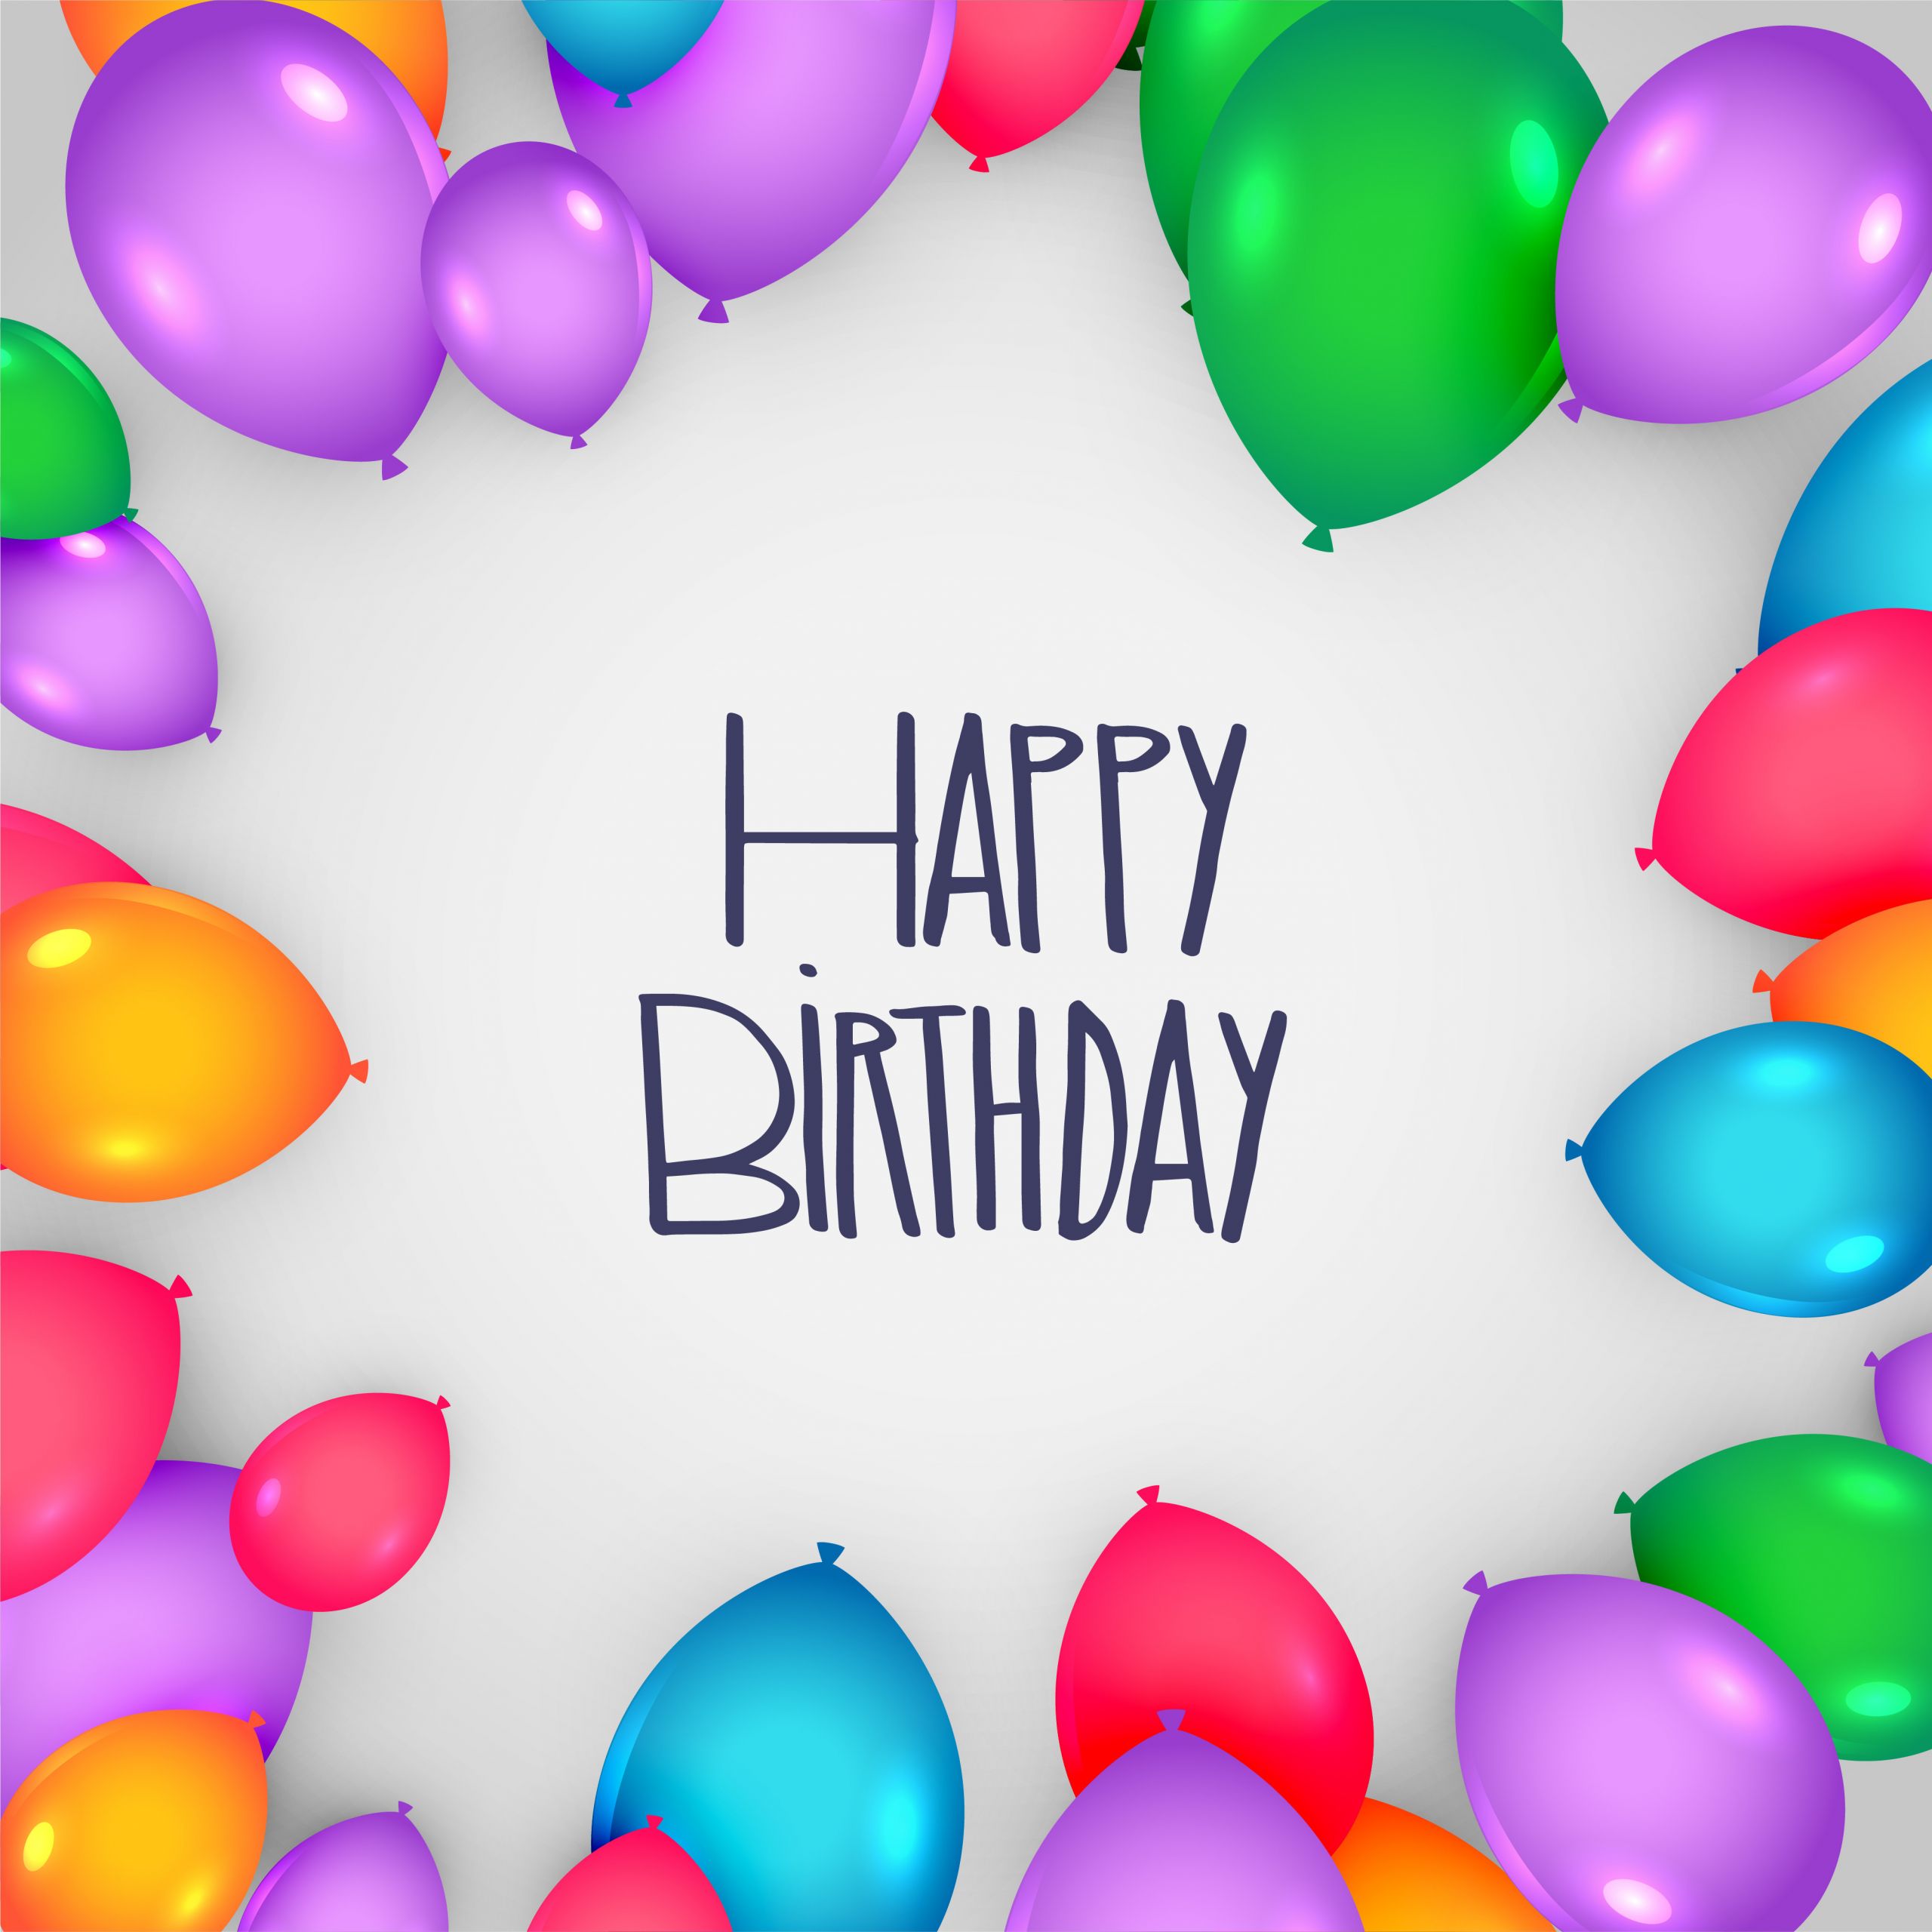 Design A Birthday Card
 happy birthday card design with colorful balloons